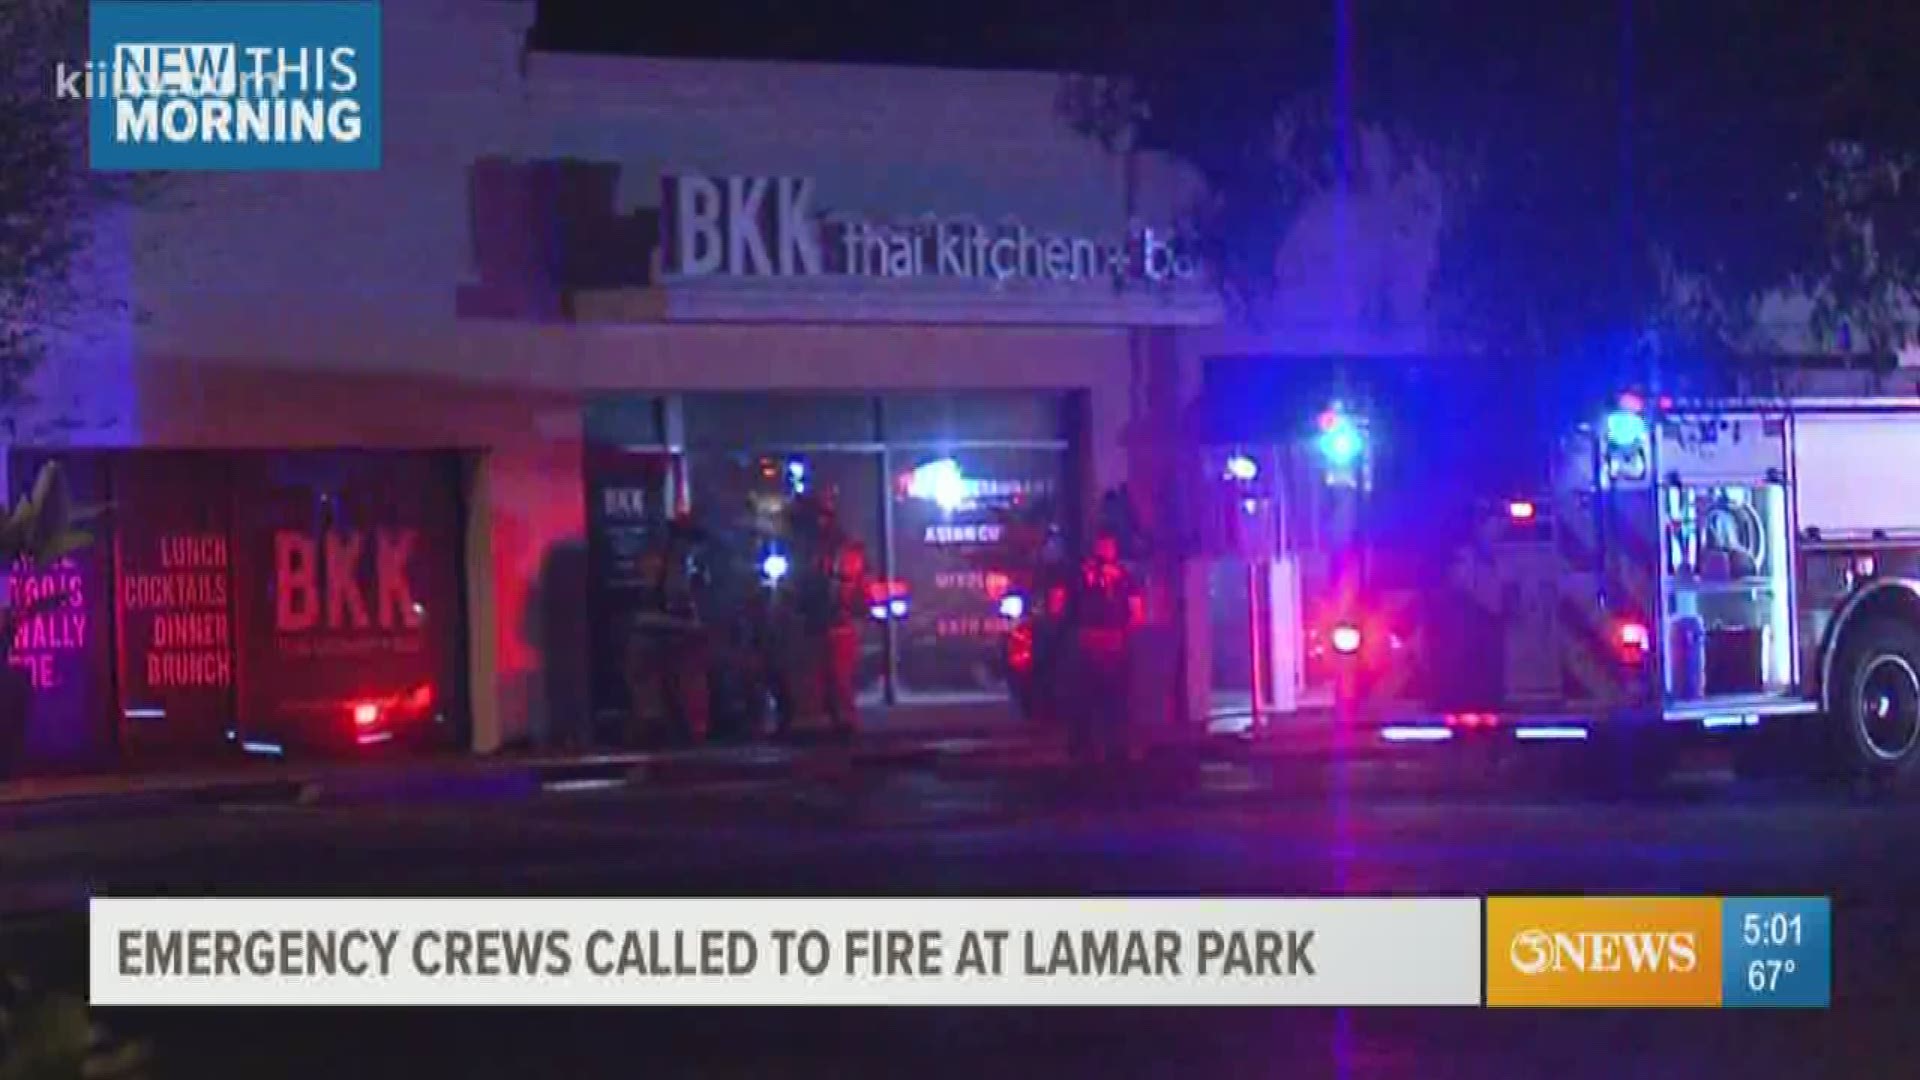 The Corpus Christi Fire Department was called to the BKK thai kitchen and bar in the Lamar Park Shopping Center to investigate reports of smoke.